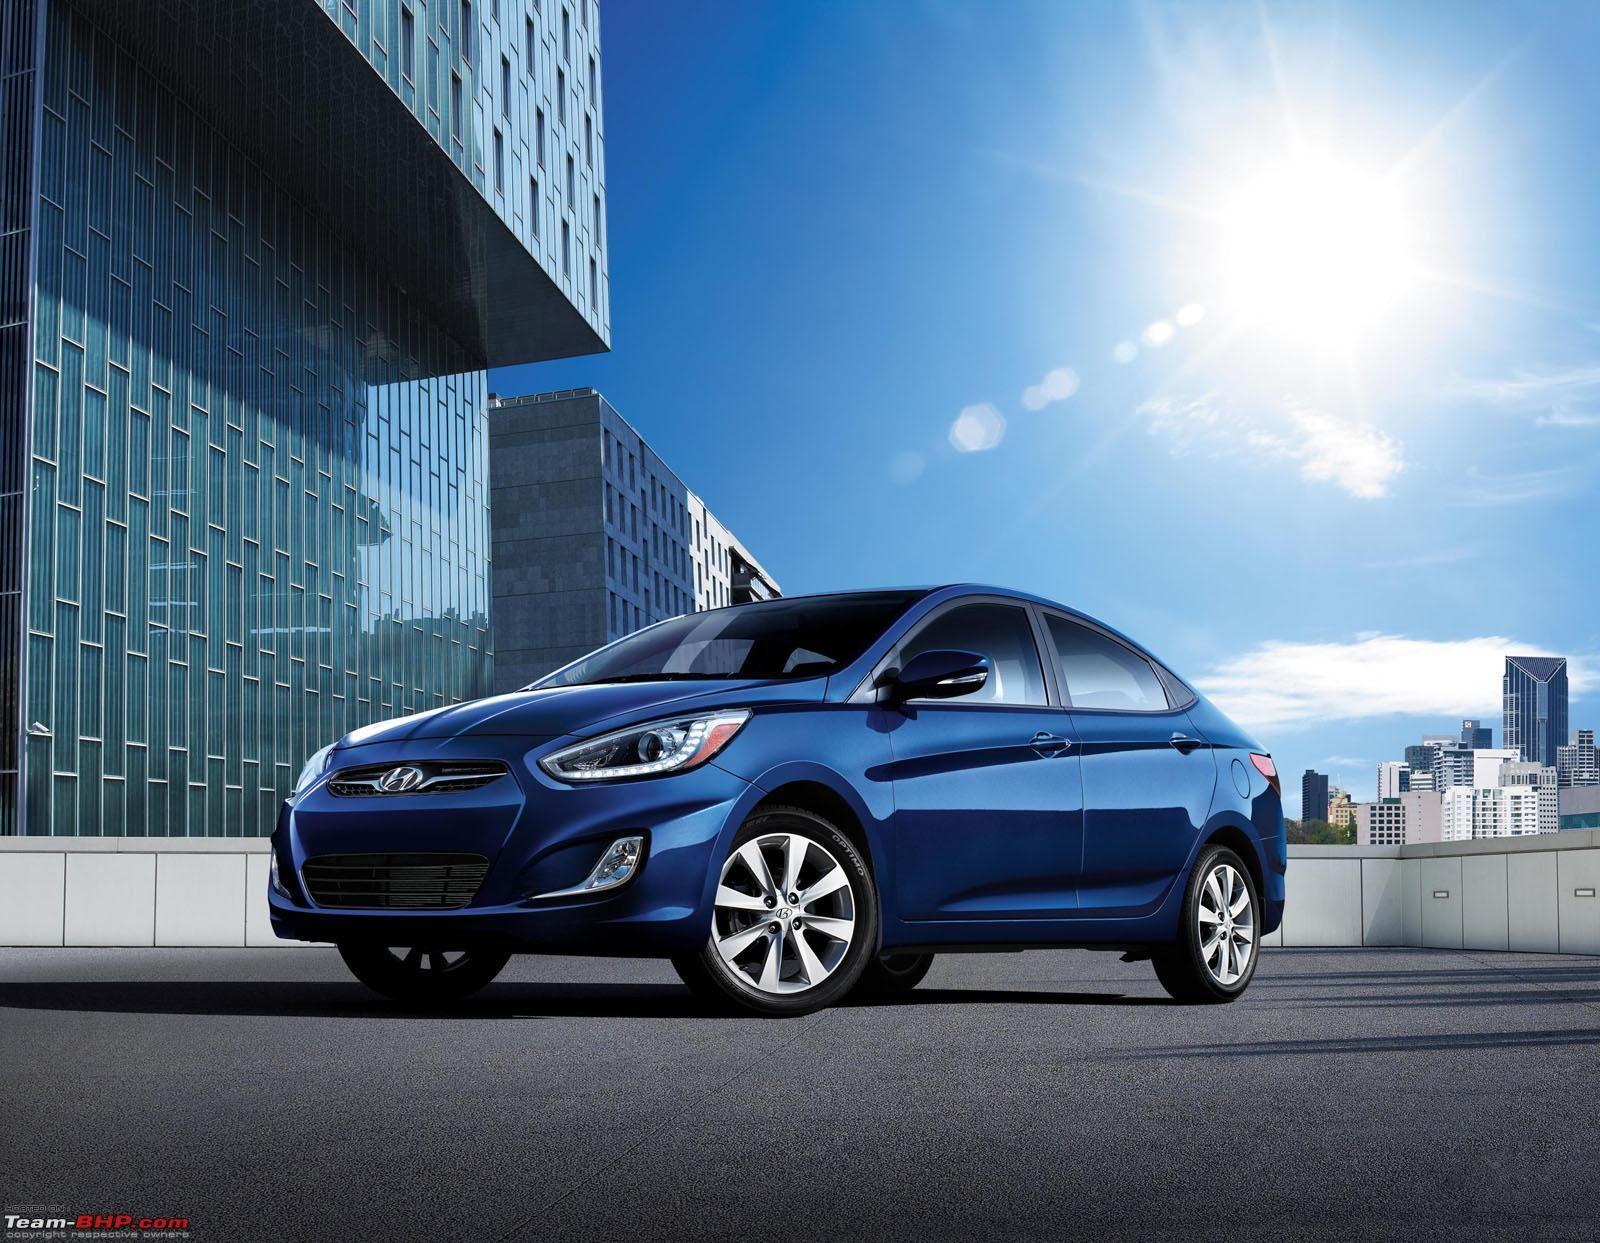 Hyundai Verna Fluidic gets minor updates. And some omissions